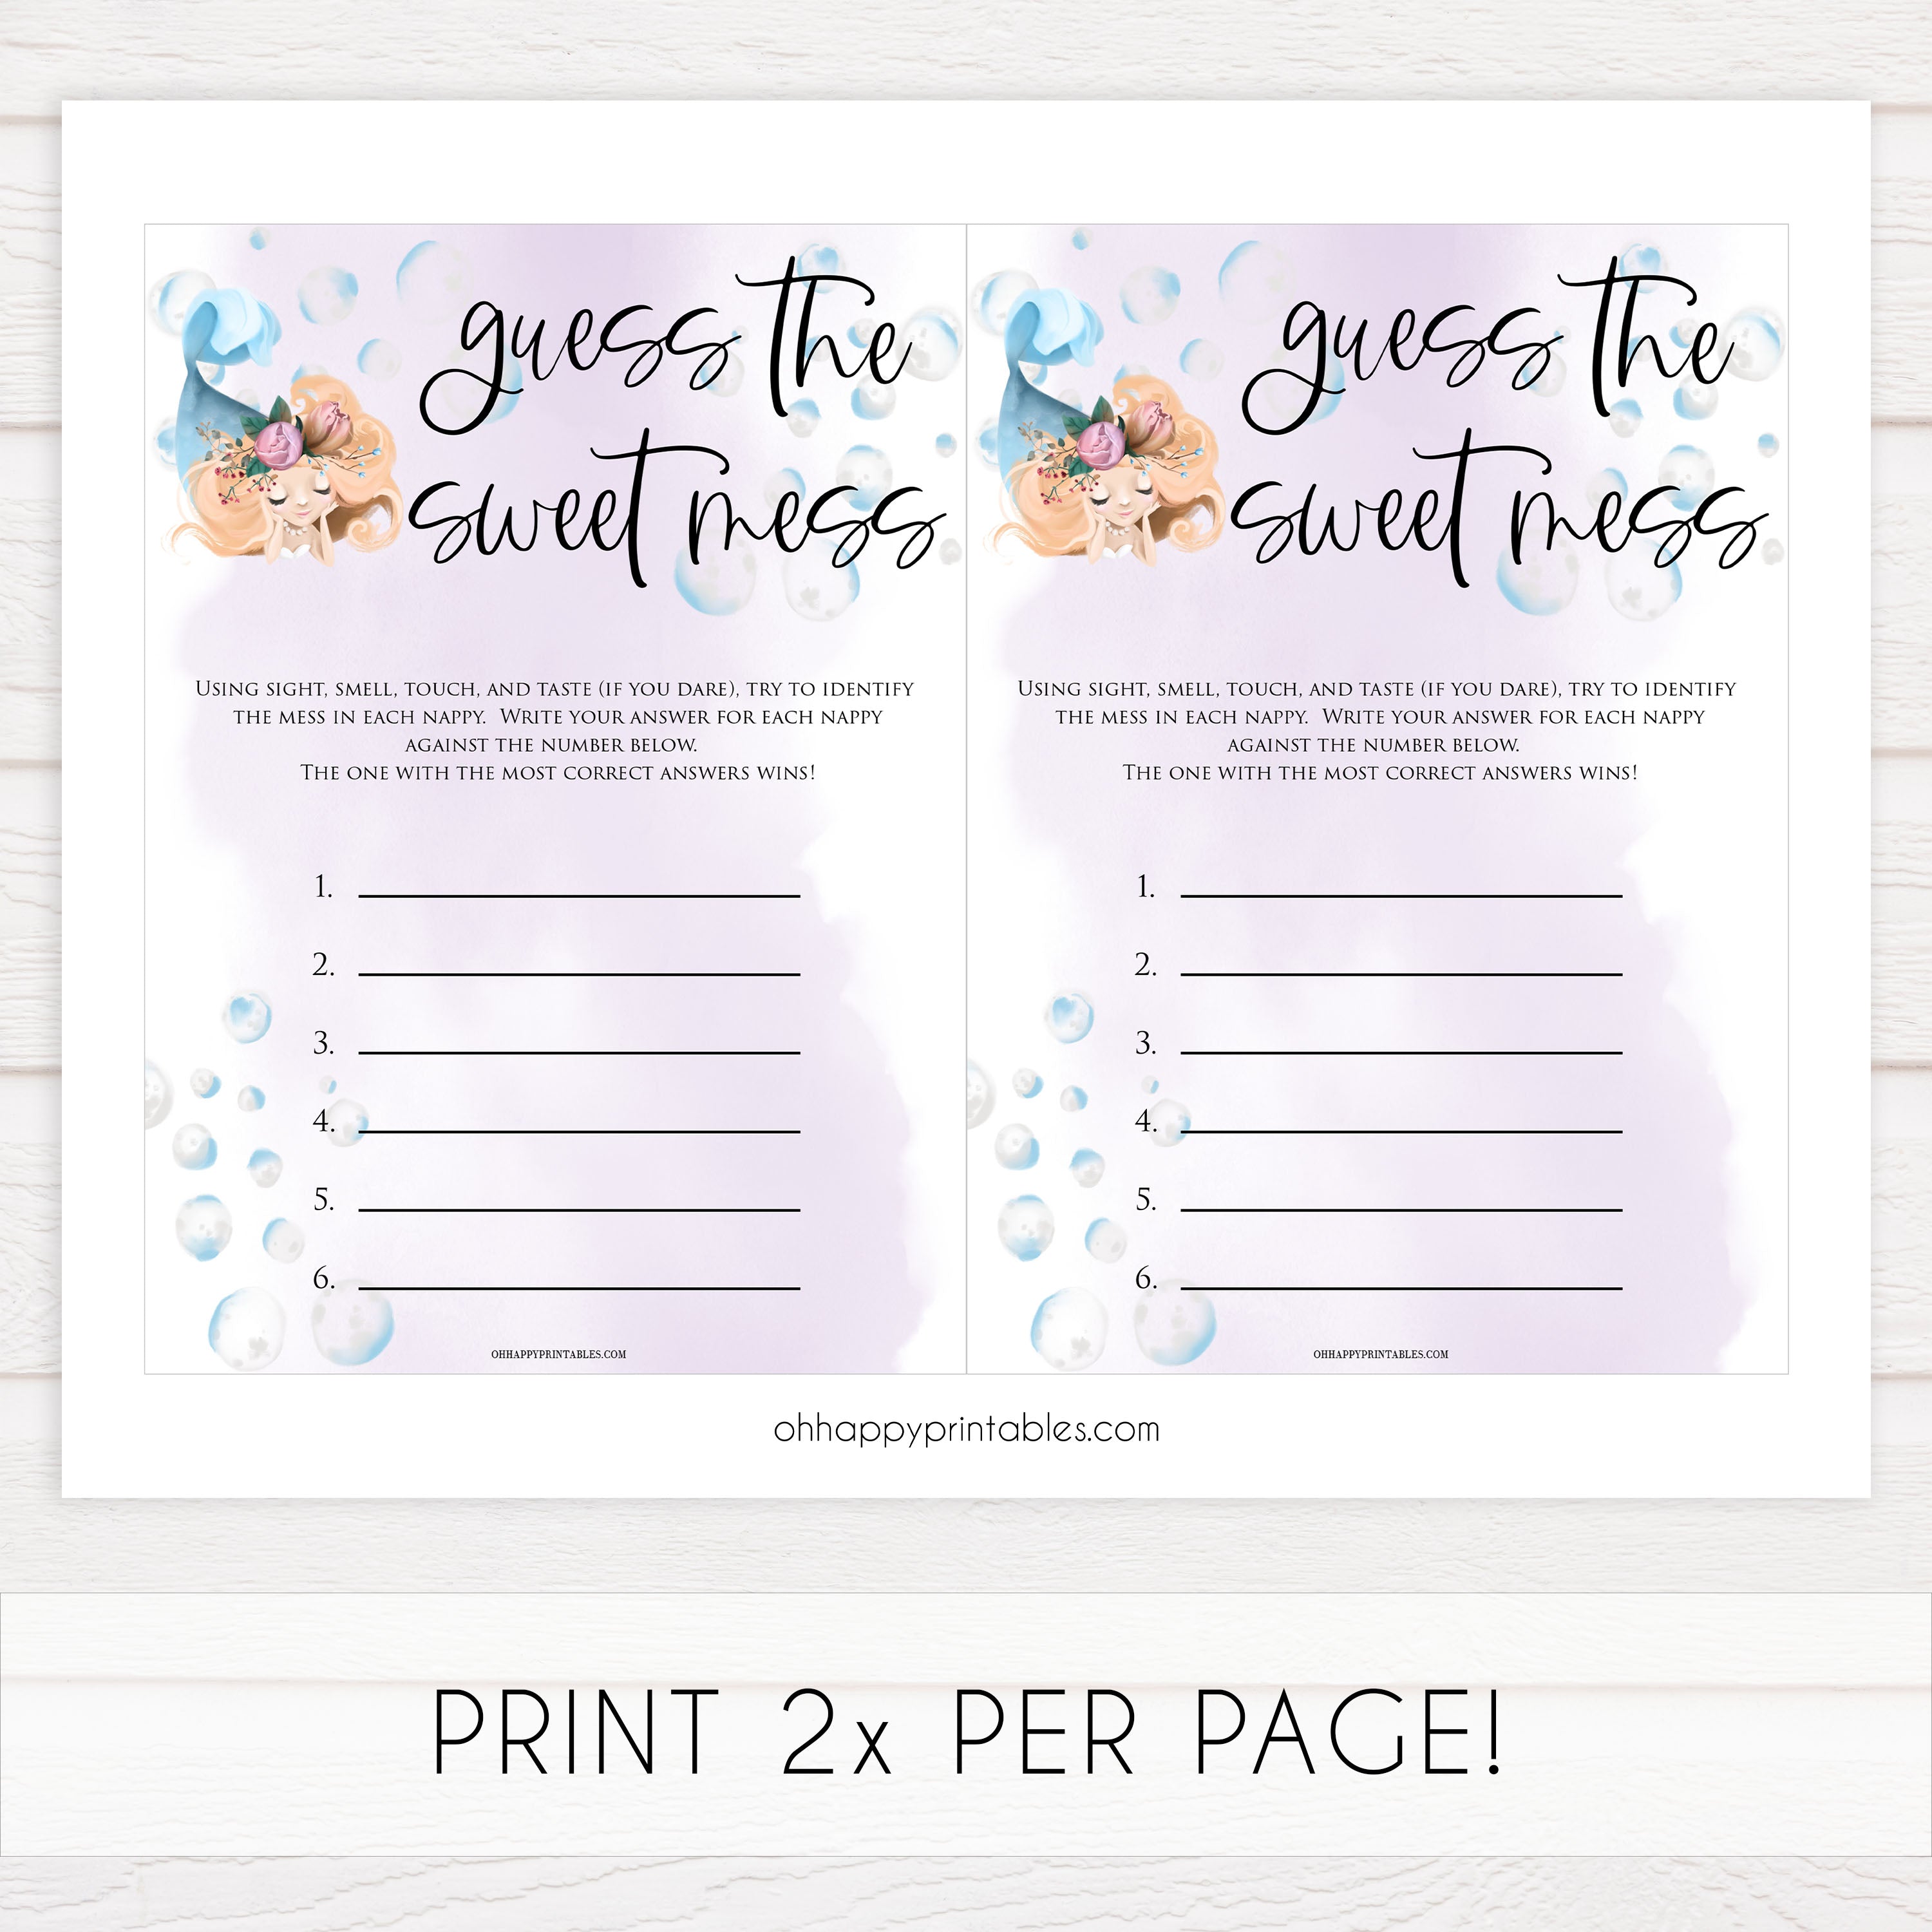 Guess the sweet mess baby game, Printable baby shower games, little mermaid baby games, baby shower games, fun baby shower ideas, top baby shower ideas, little mermaid baby shower, baby shower games, pink hearts baby shower ideas